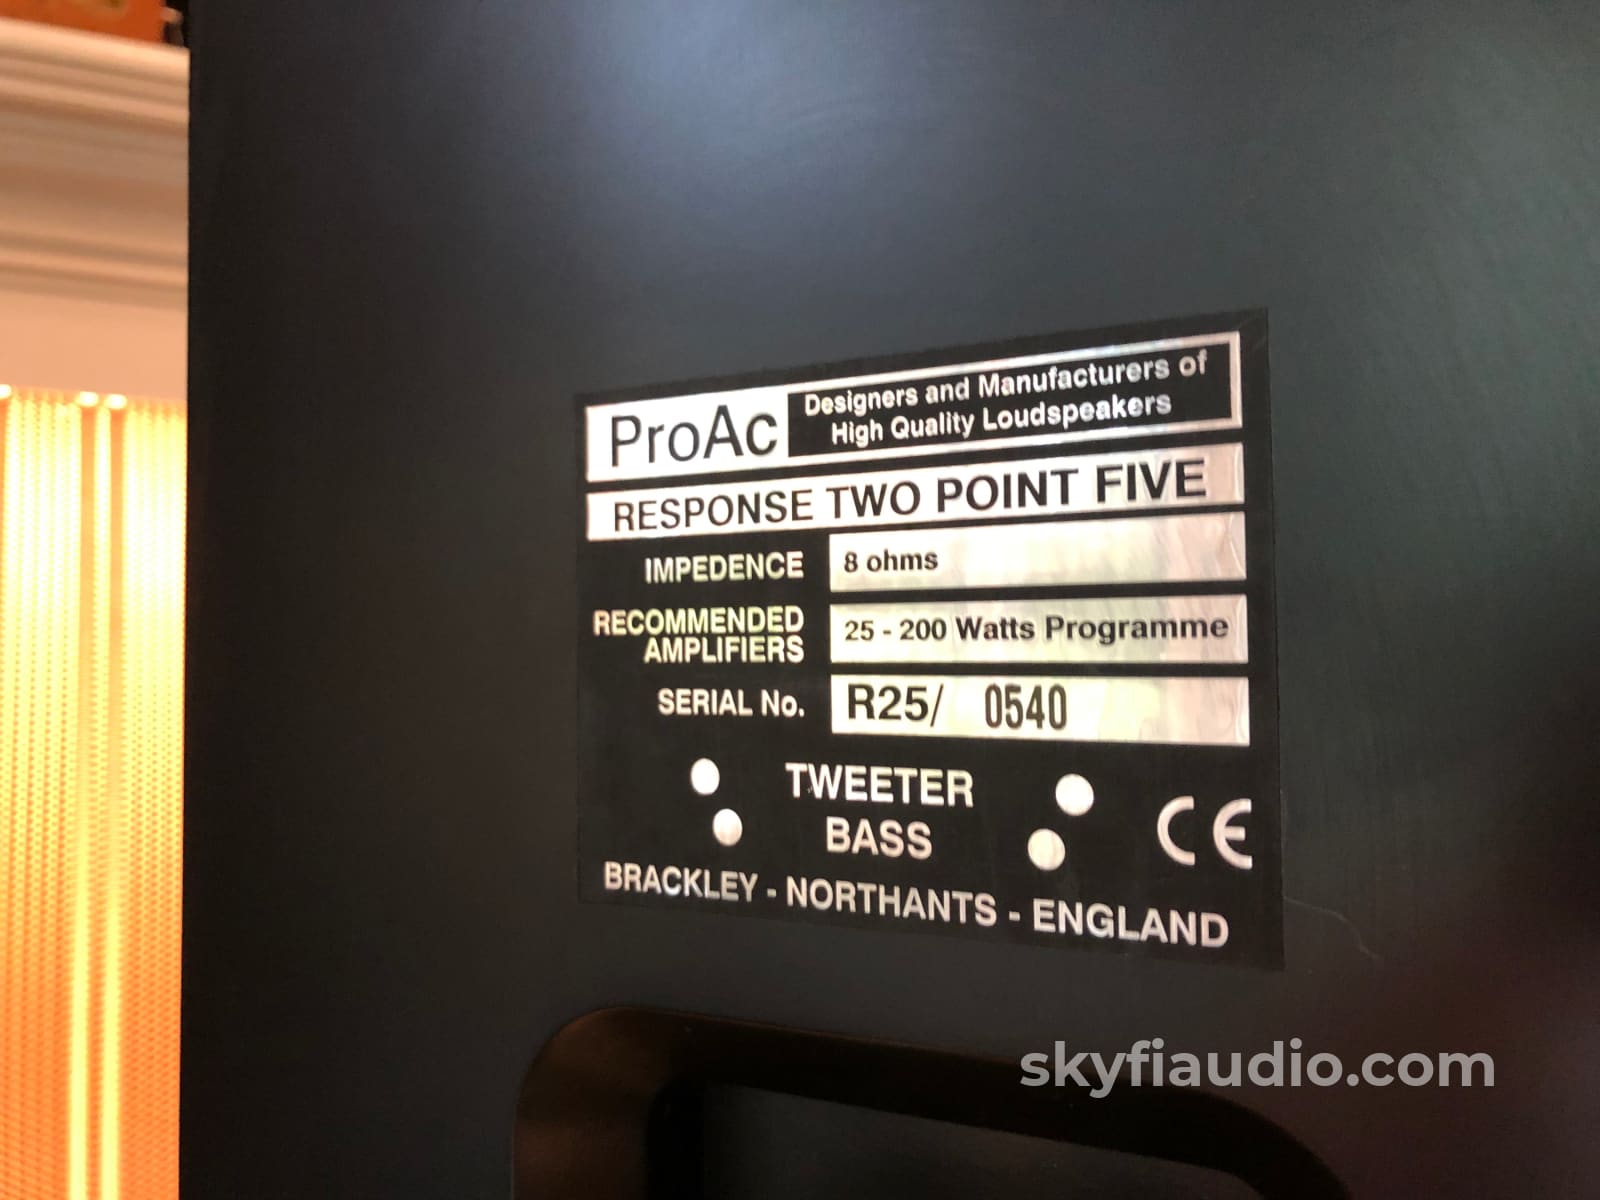 Proac Response Two Point Five (2.5) Speakers - Boxed